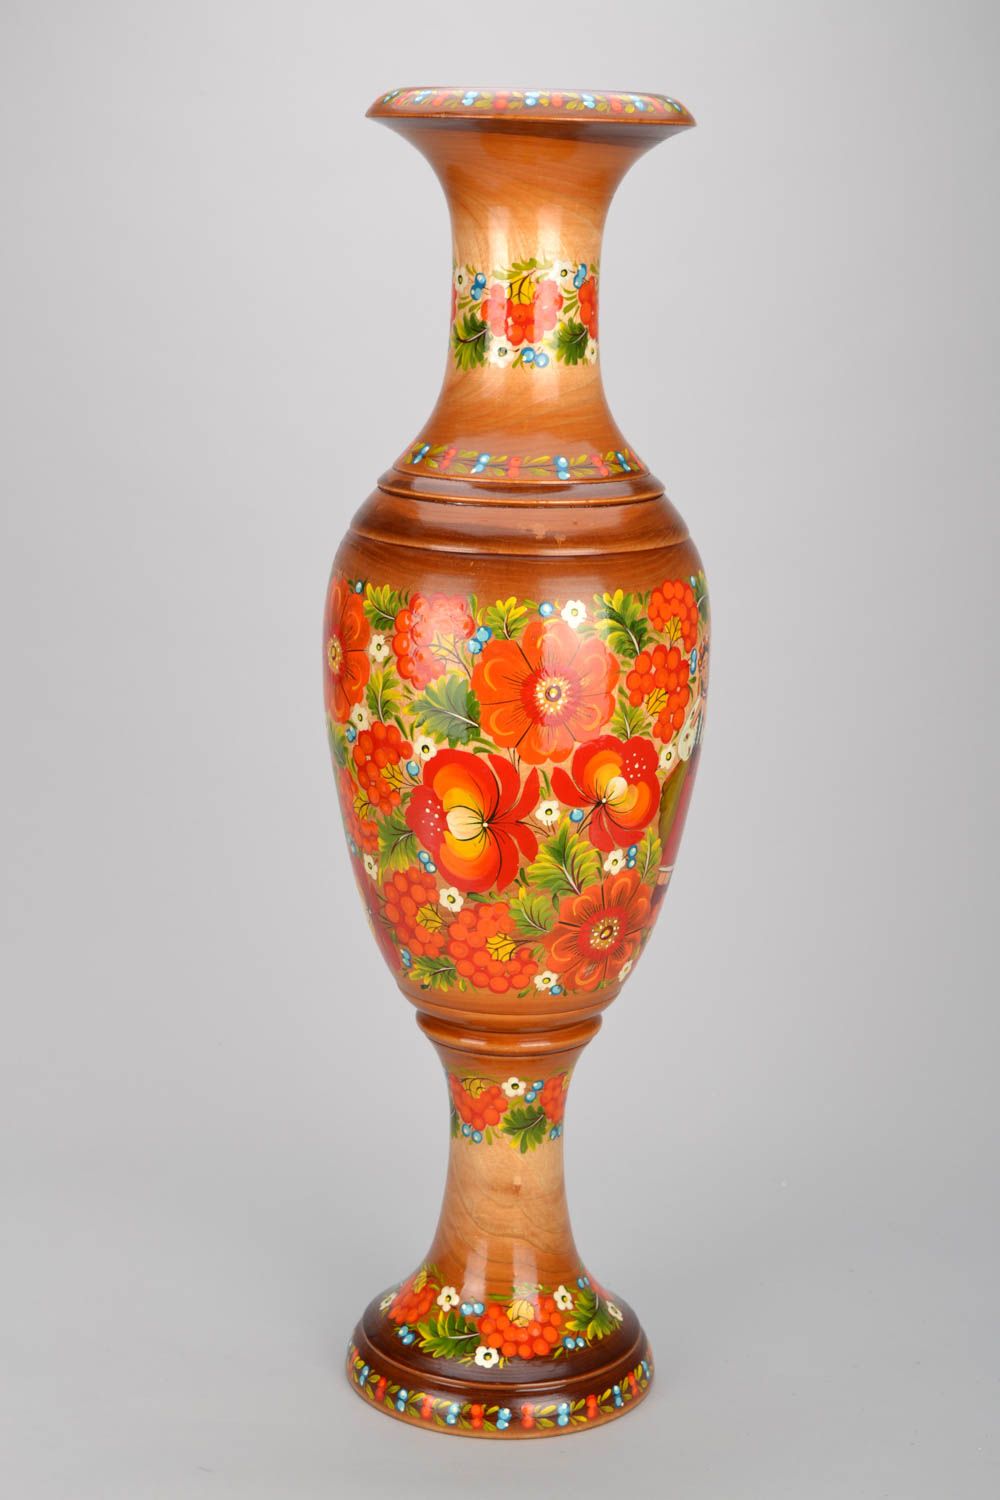 26 inches wooden handmade floor vase in floral design with red flowers 3,5 lb photo 1